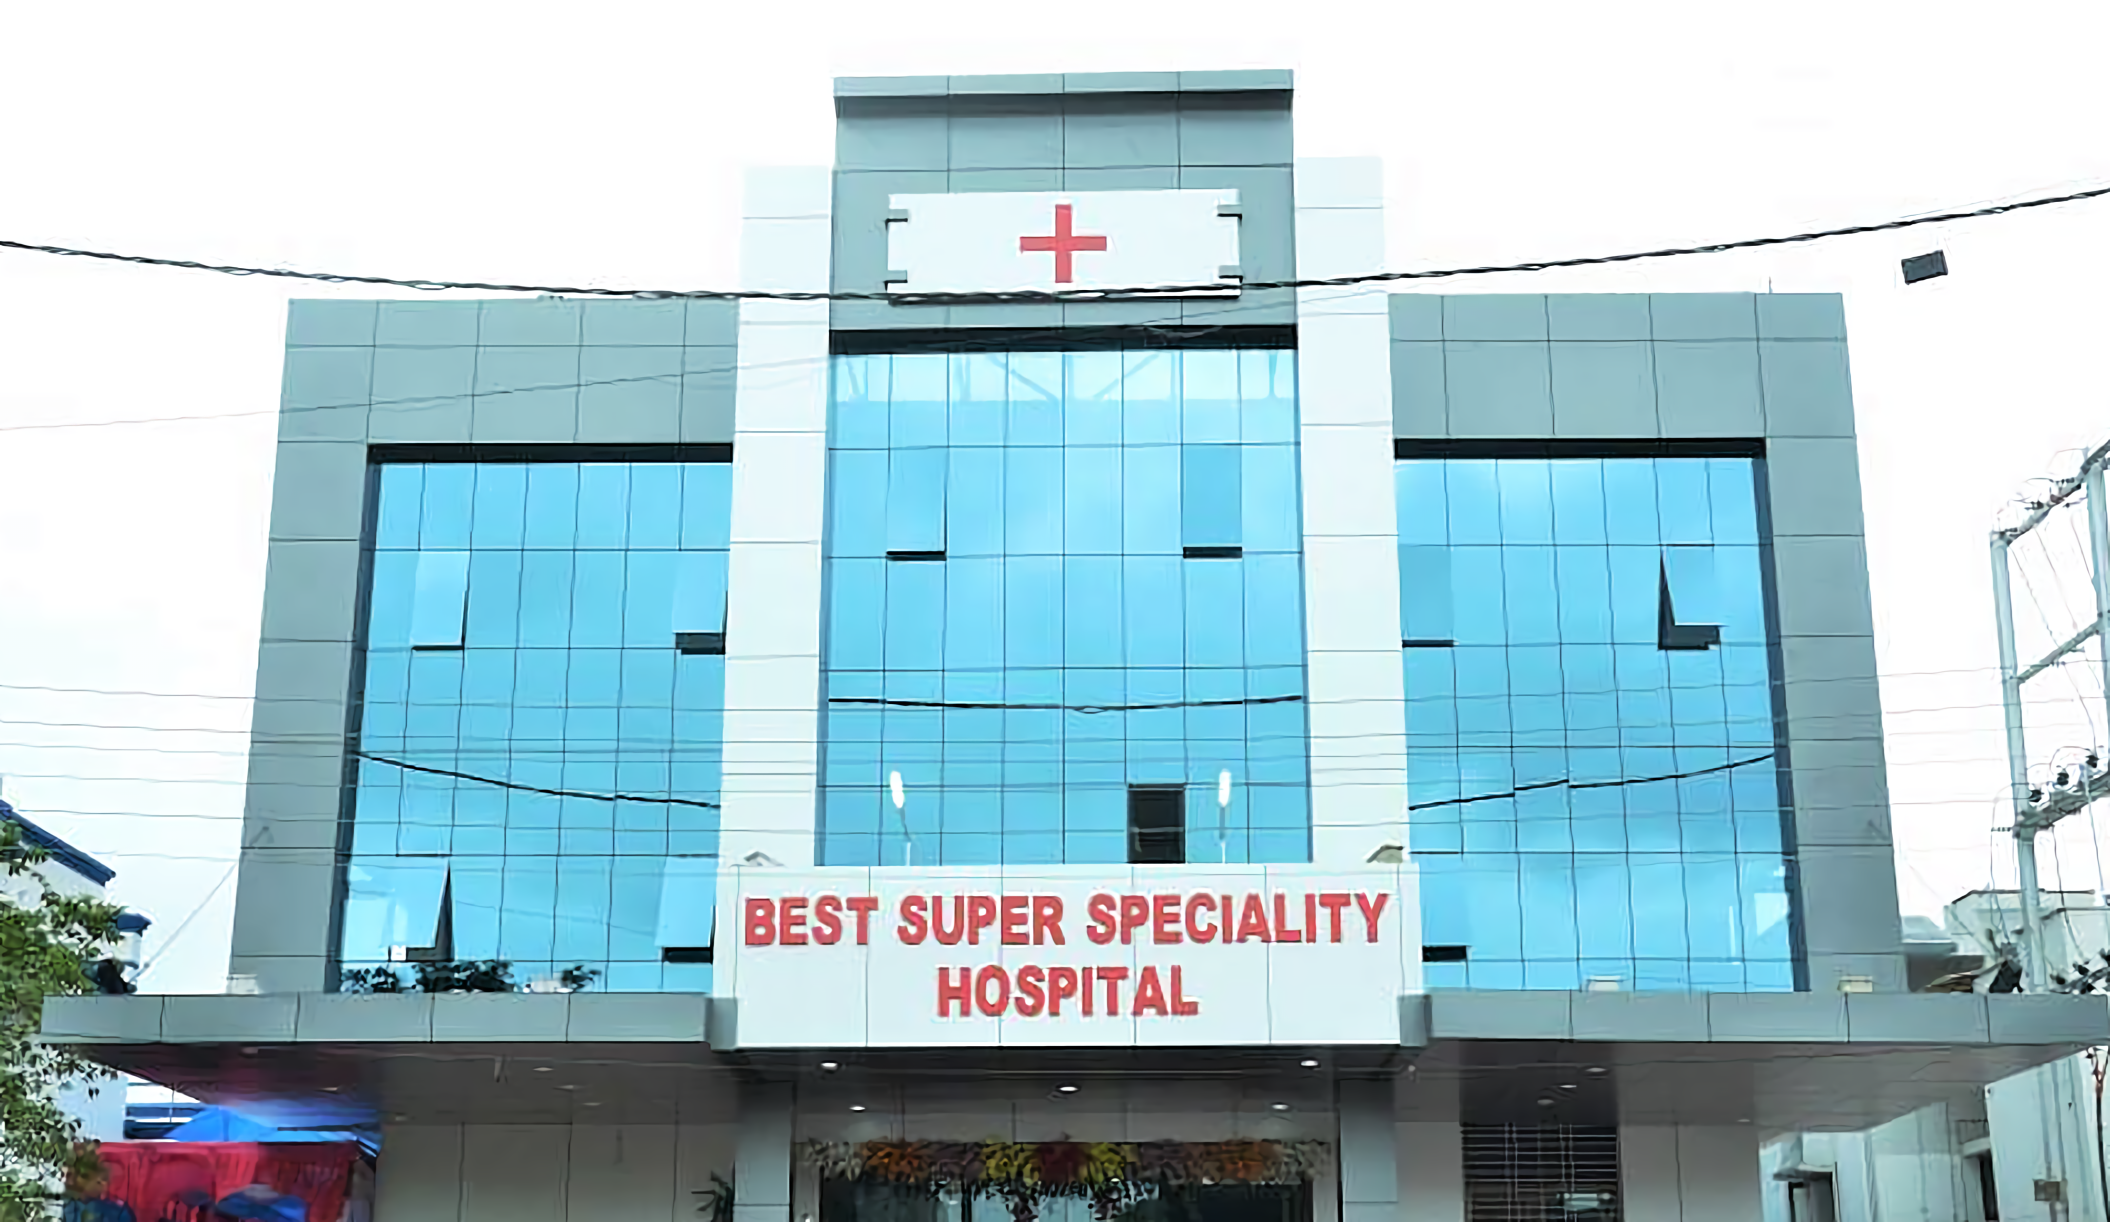 Best Super Speciality Hospital